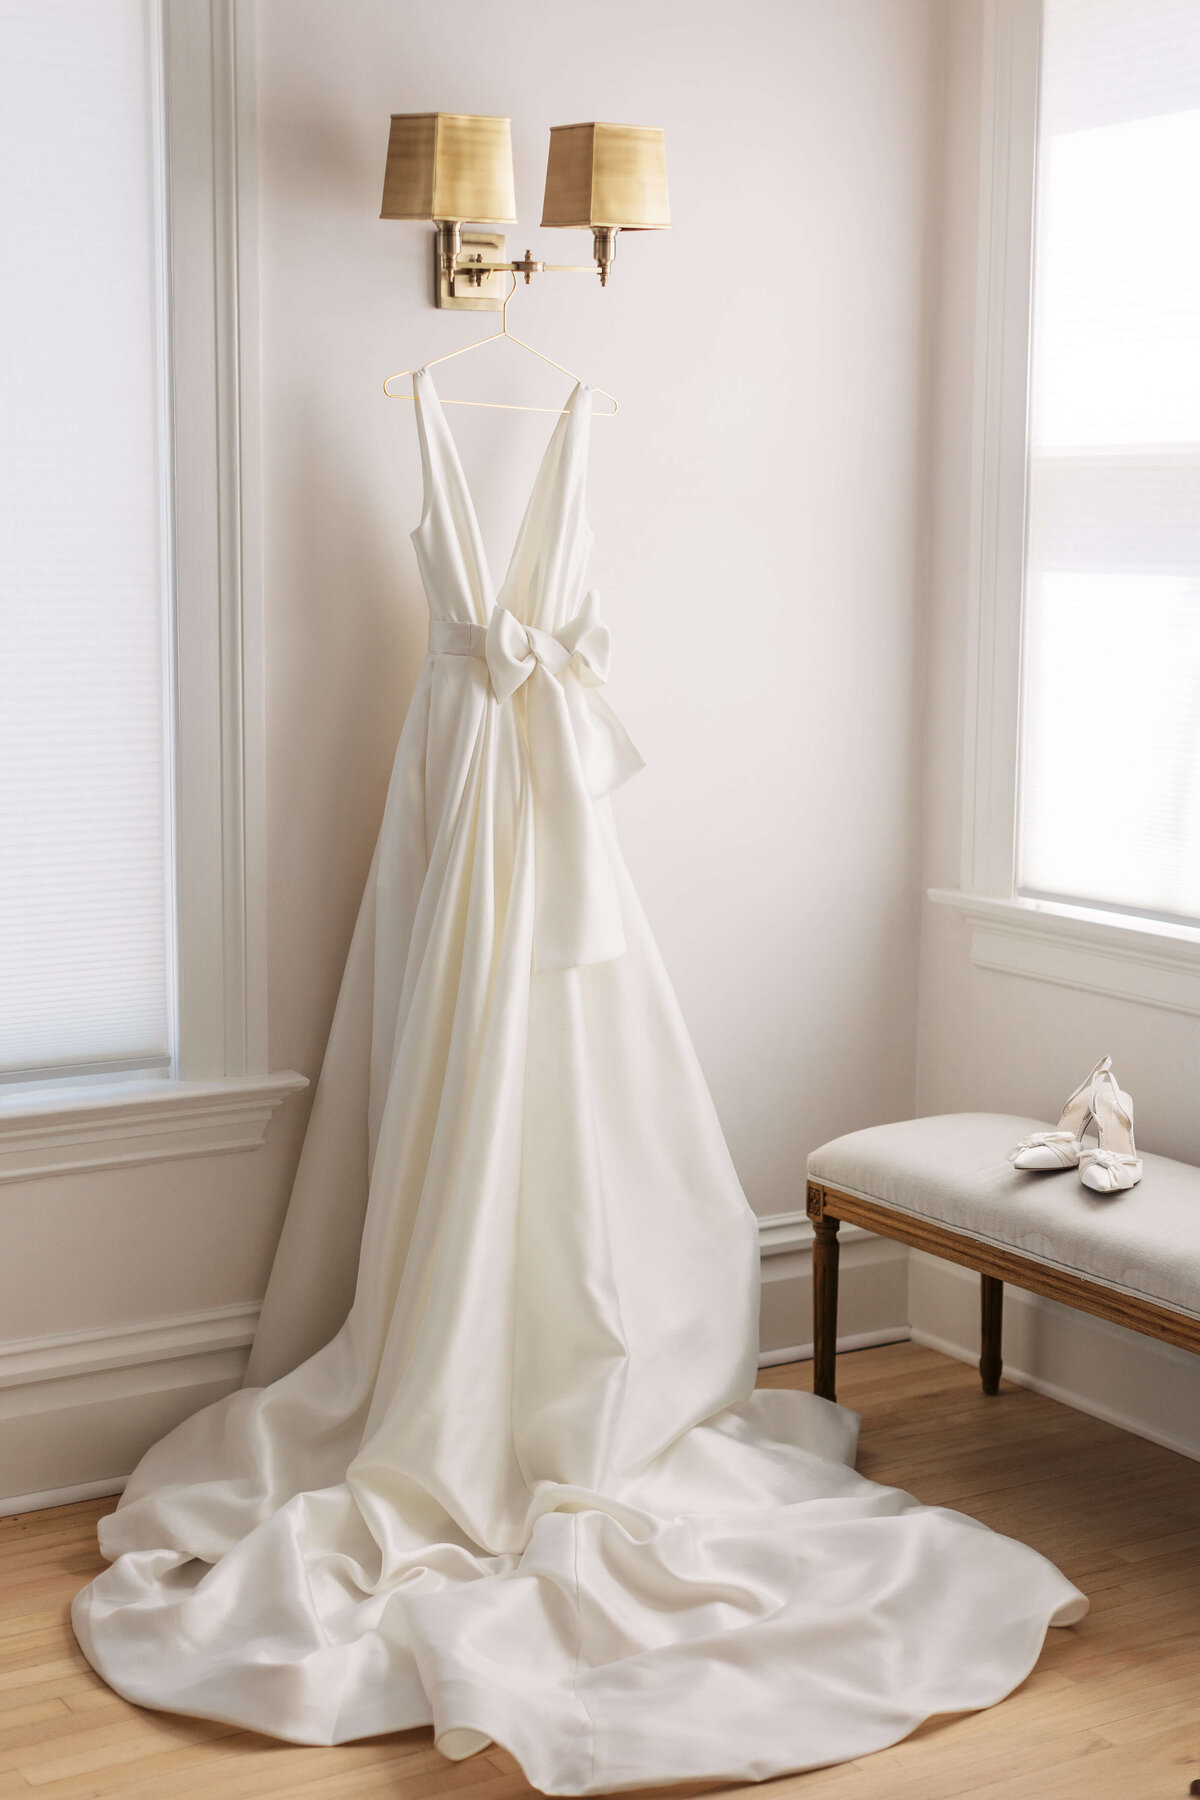 Bridal gown hangs on a light fixture next to bridal shoes.